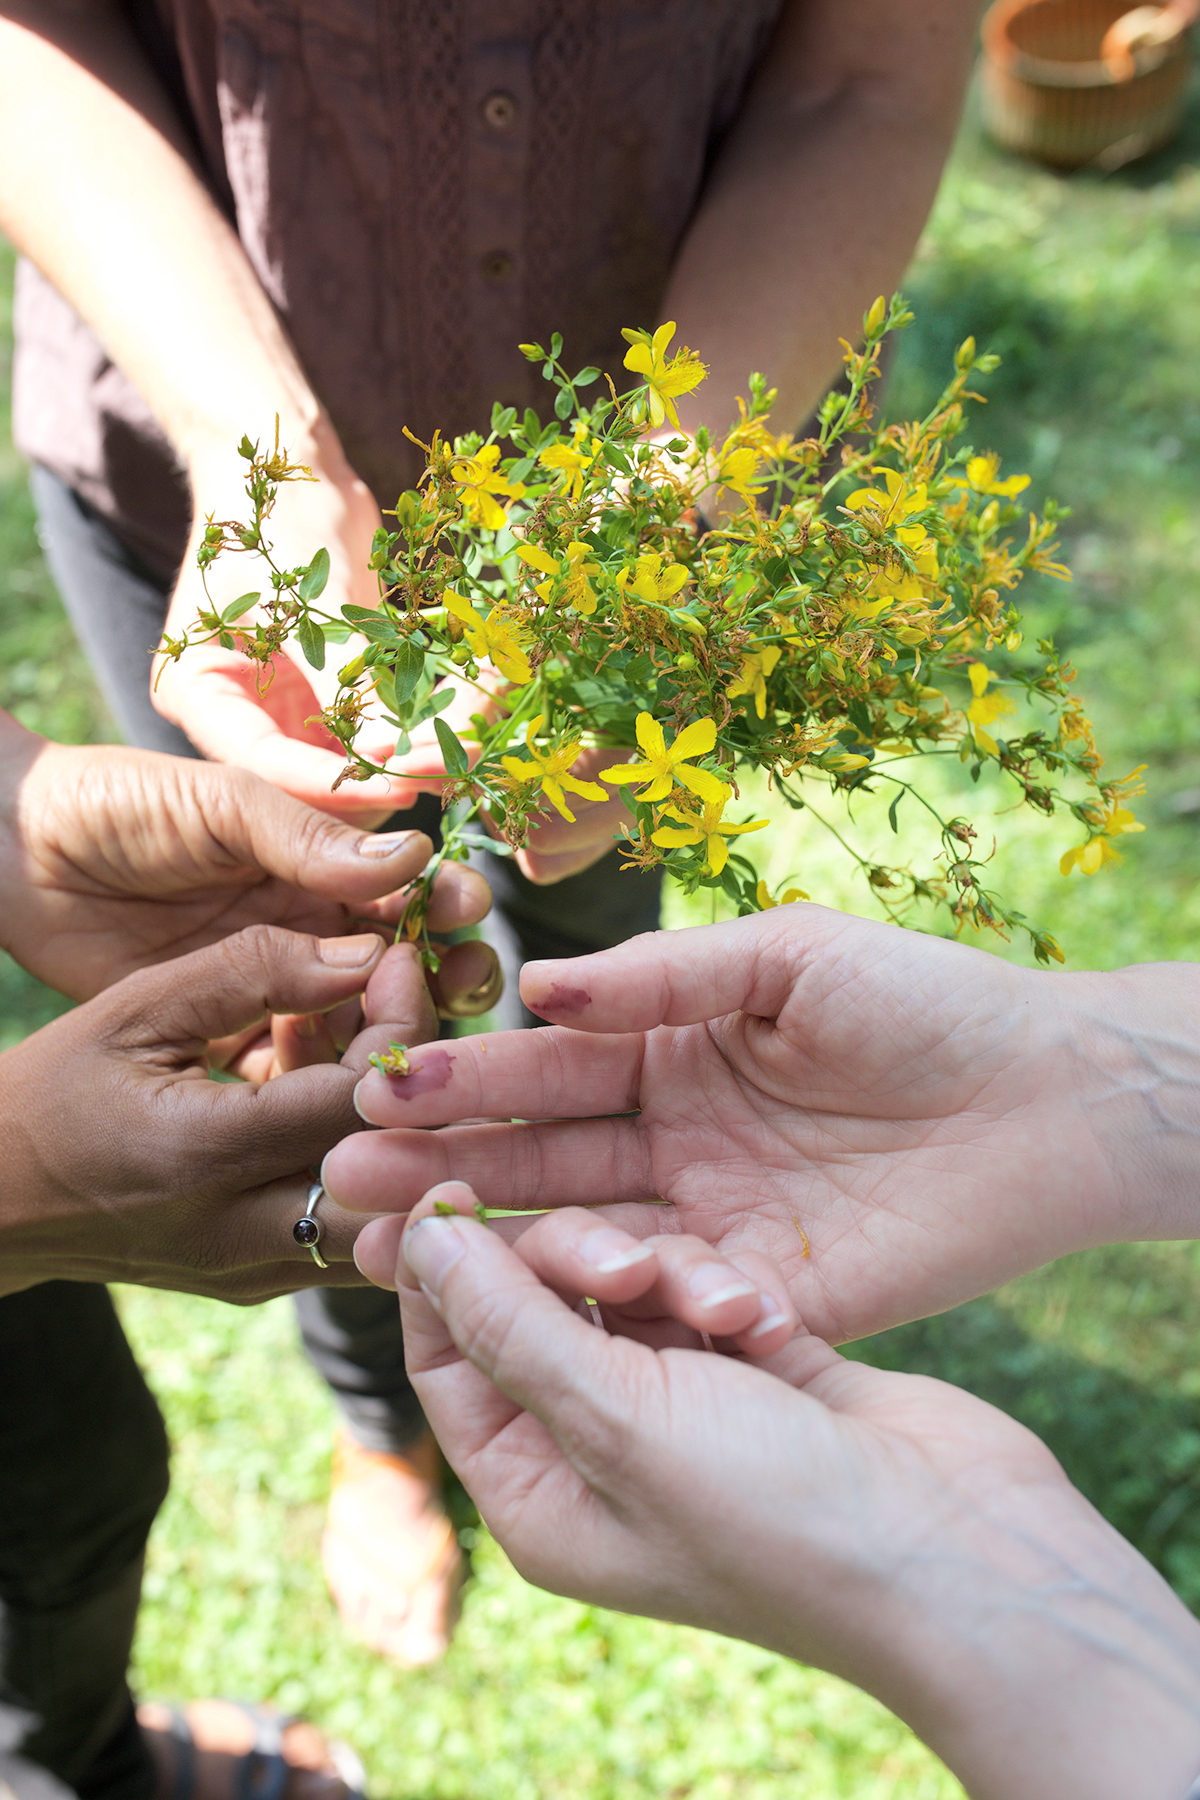 St. John's Wort in Bloom: How To Identify And Forage St. John's Wort | Herbal Academy | Summer is the blooming season for the well-beloved herb, St. John's wort. Learn how to identify and forage St. John's wort in this helpful post!